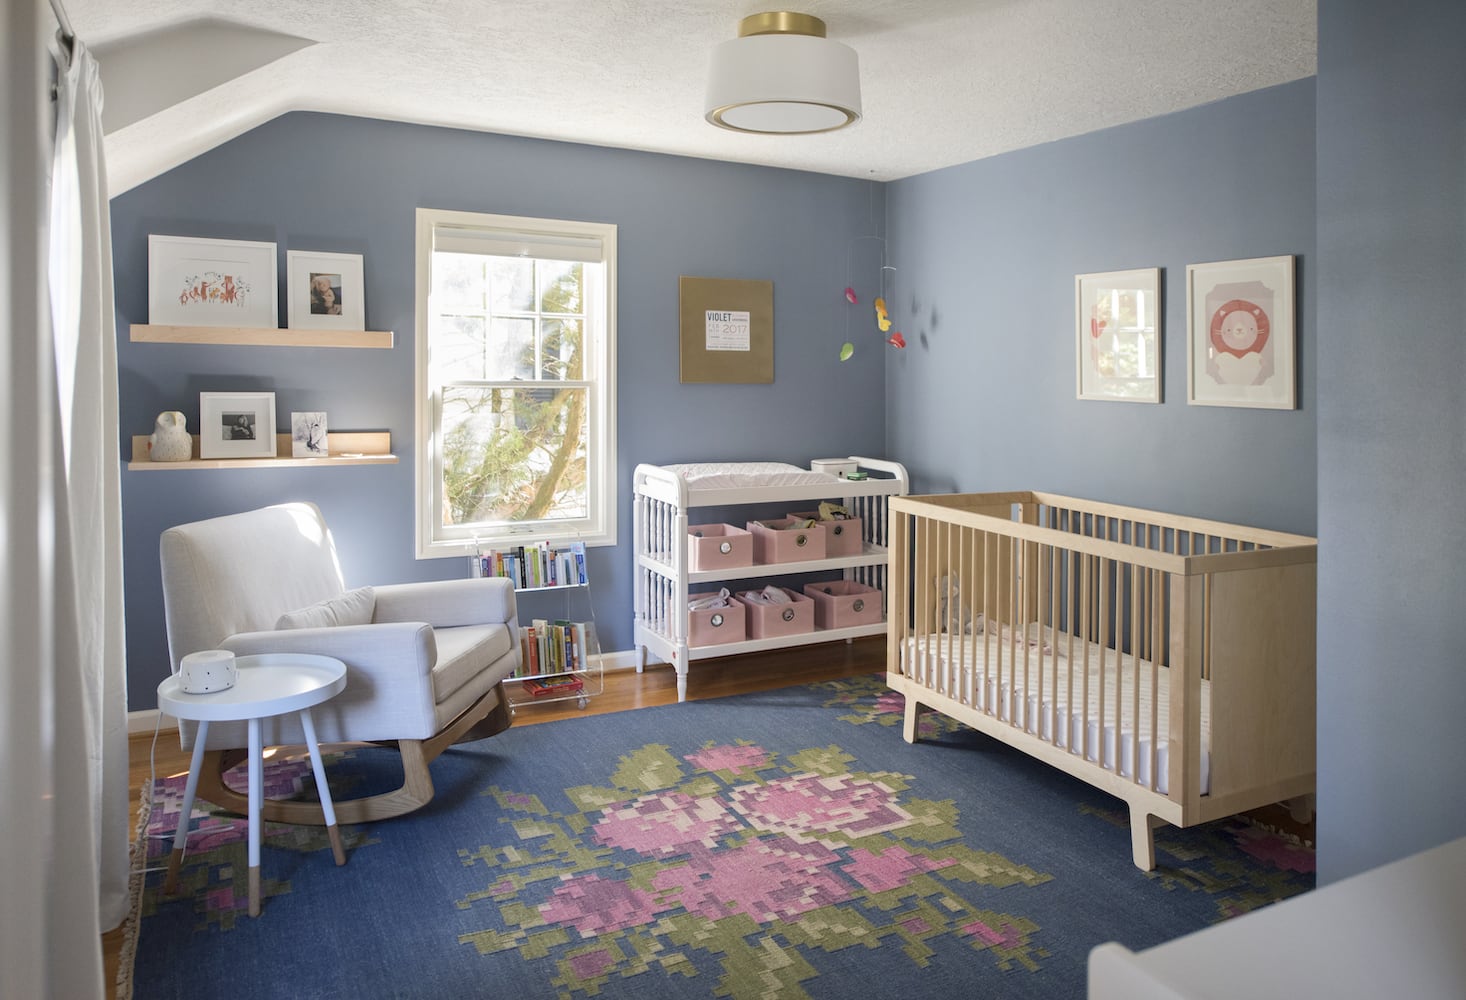 Children/kids room with pink, green and blue flower rug, rocking chair, baby crib